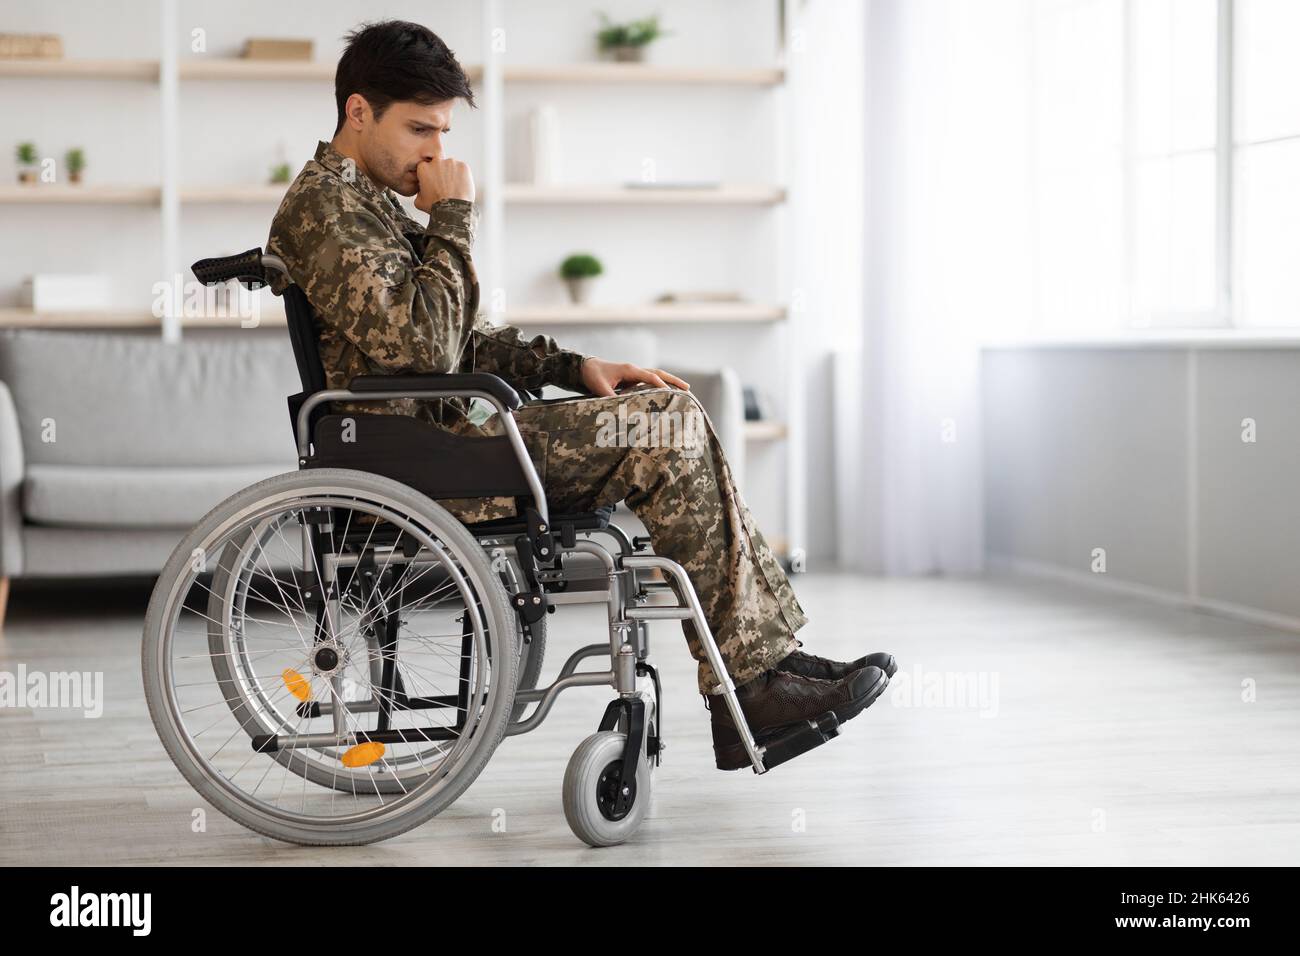 Upset young male looking at camera with sad look. He is sitting in invalid chairing wearing military uniform. Isolated on grey background. Copy space Stock Photo